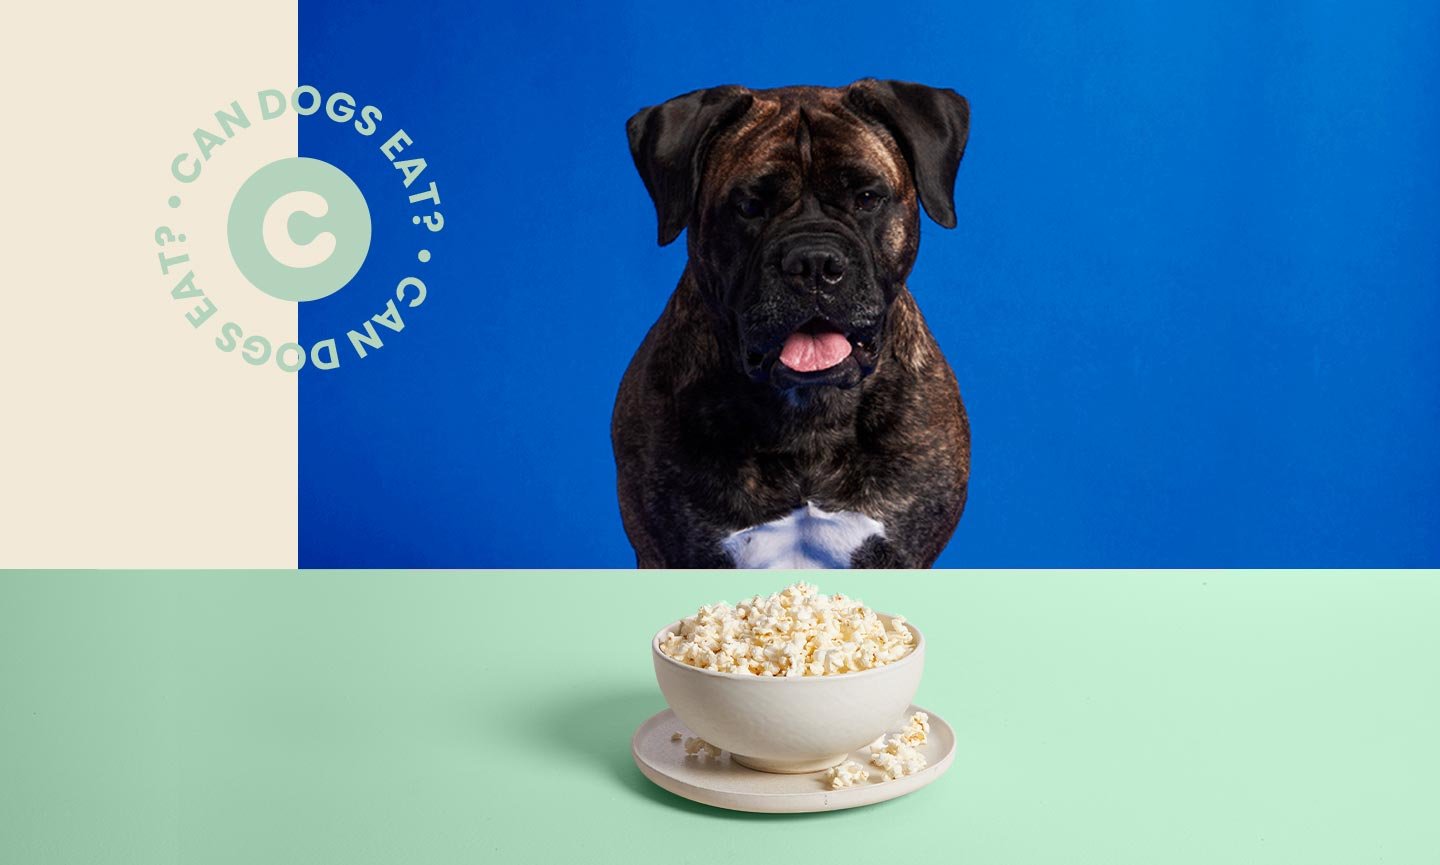 Can Dogs Eat Popcorn? Well, Yes (in Moderation)